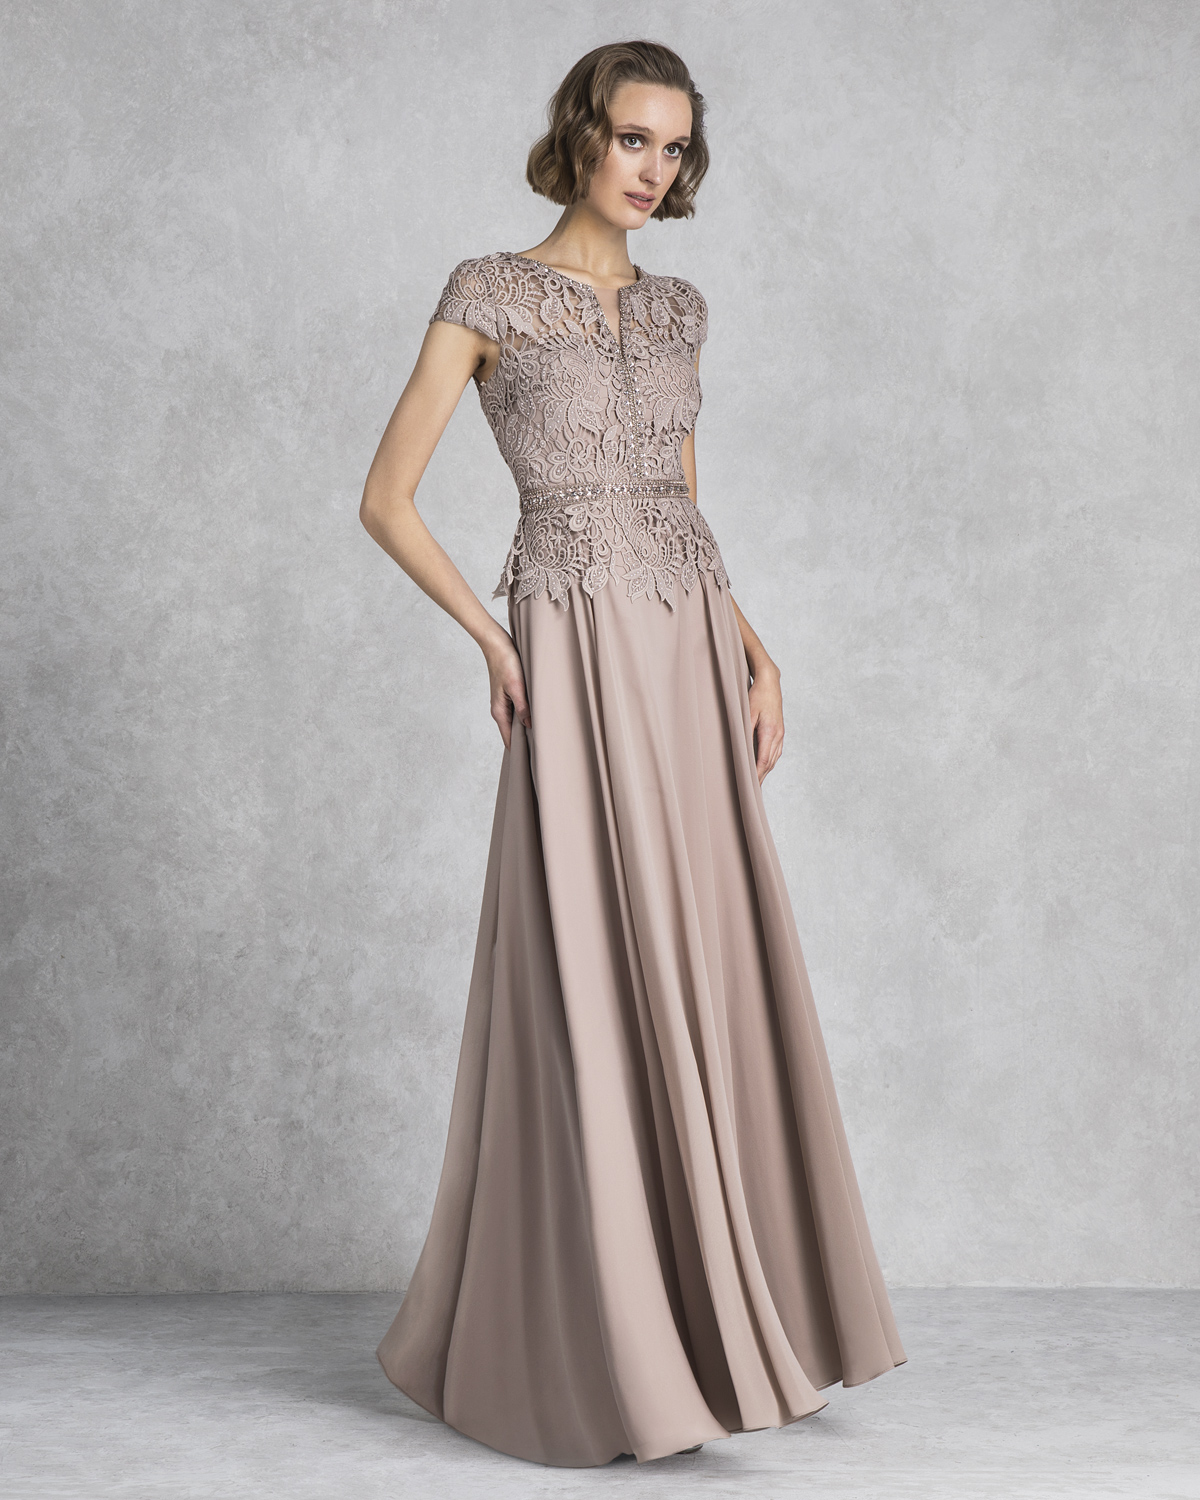 Classic Dresses / Long evening dress for the mother of the bride with lace top and satin skirt